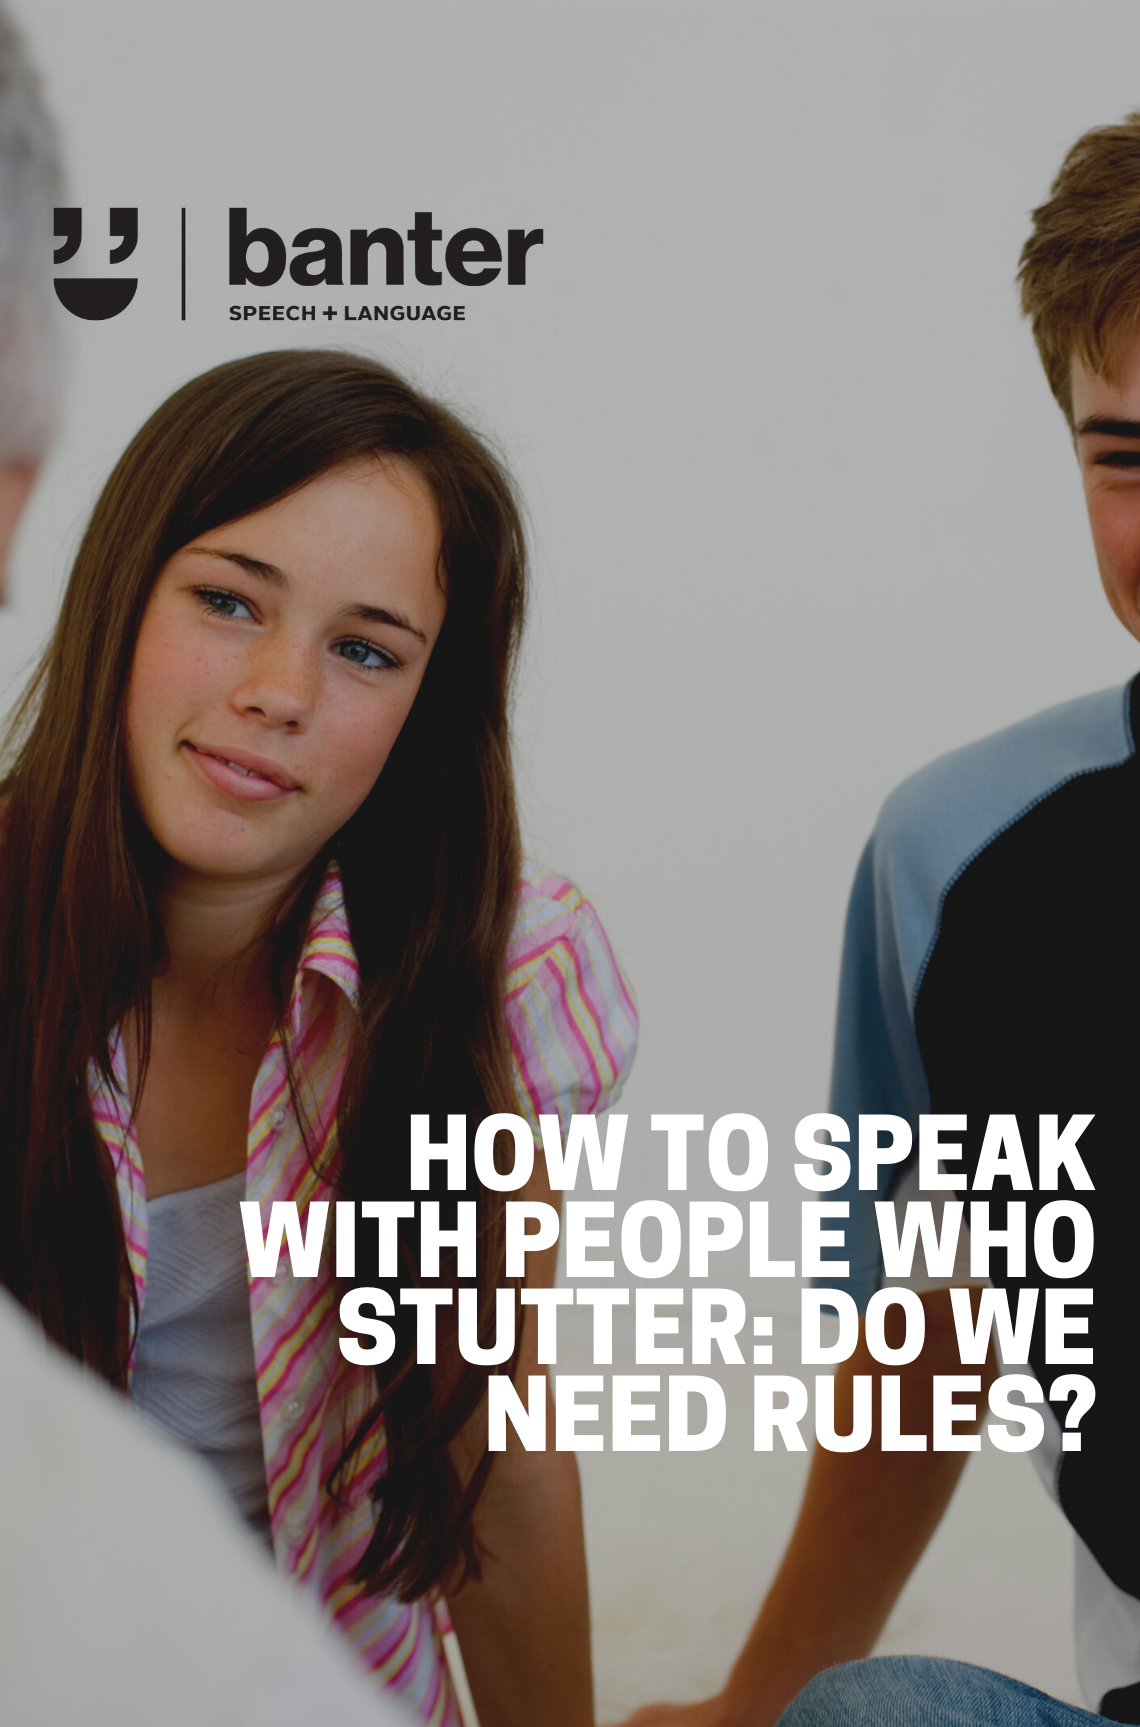 How to speak with people who stutter do we need rules